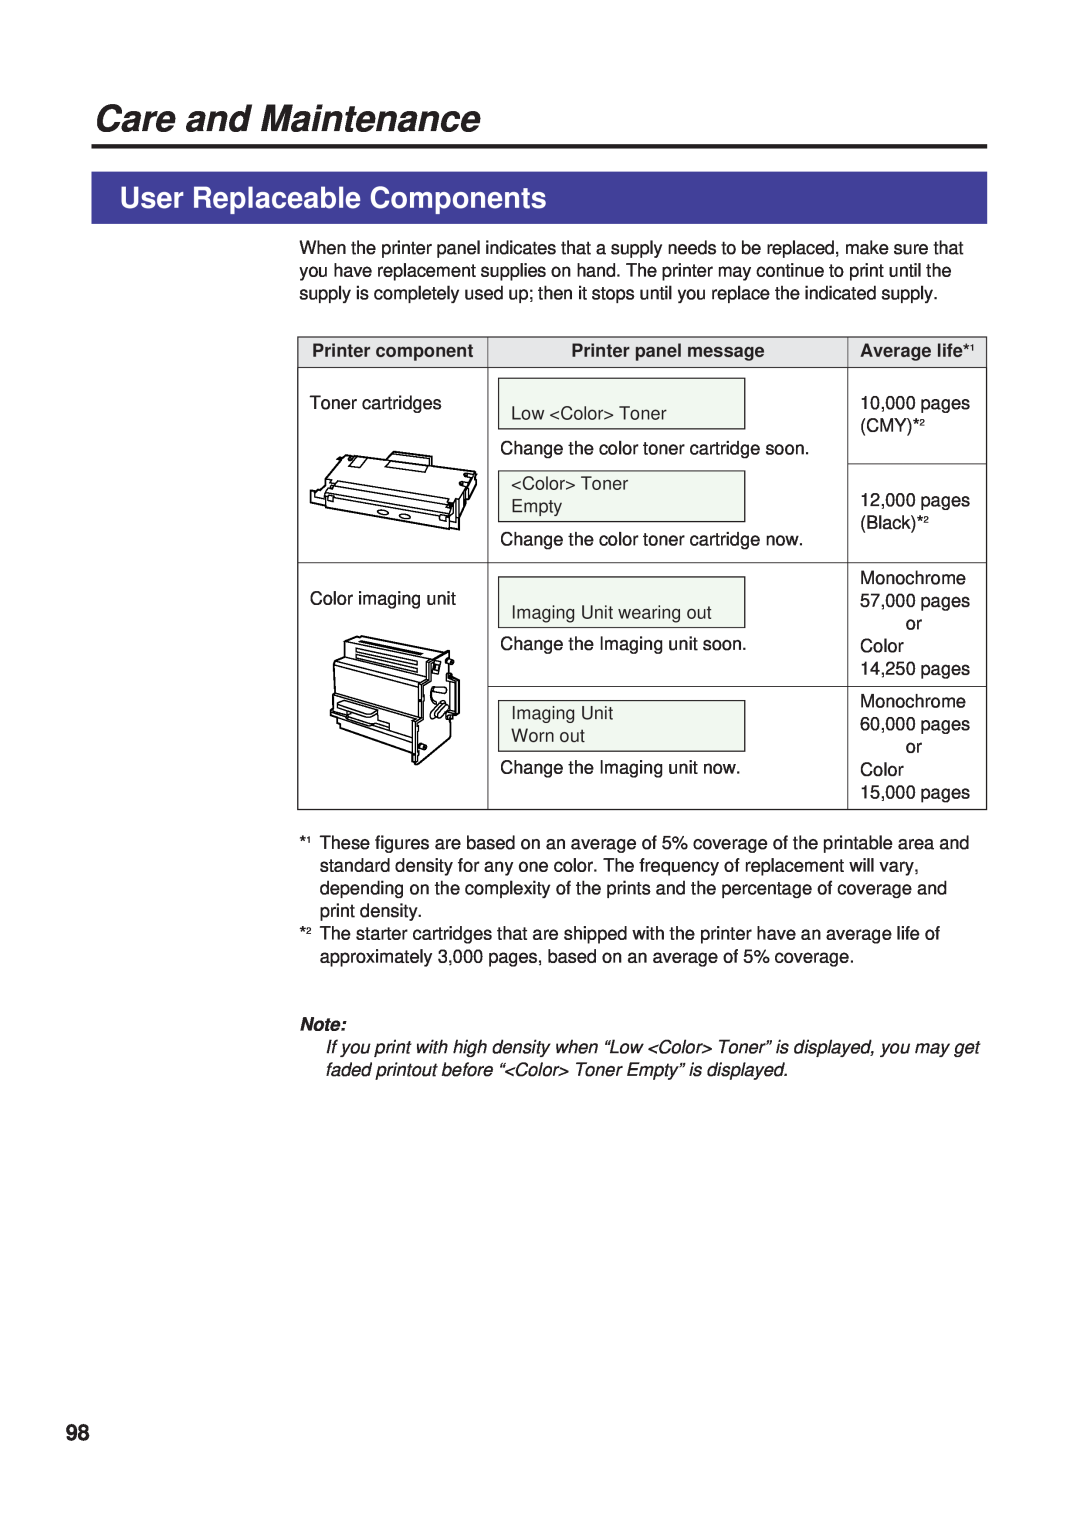 Panasonic KX-PS8000 manual User Replaceable Components, Care and Maintenance, Printer component, Printer panel message 